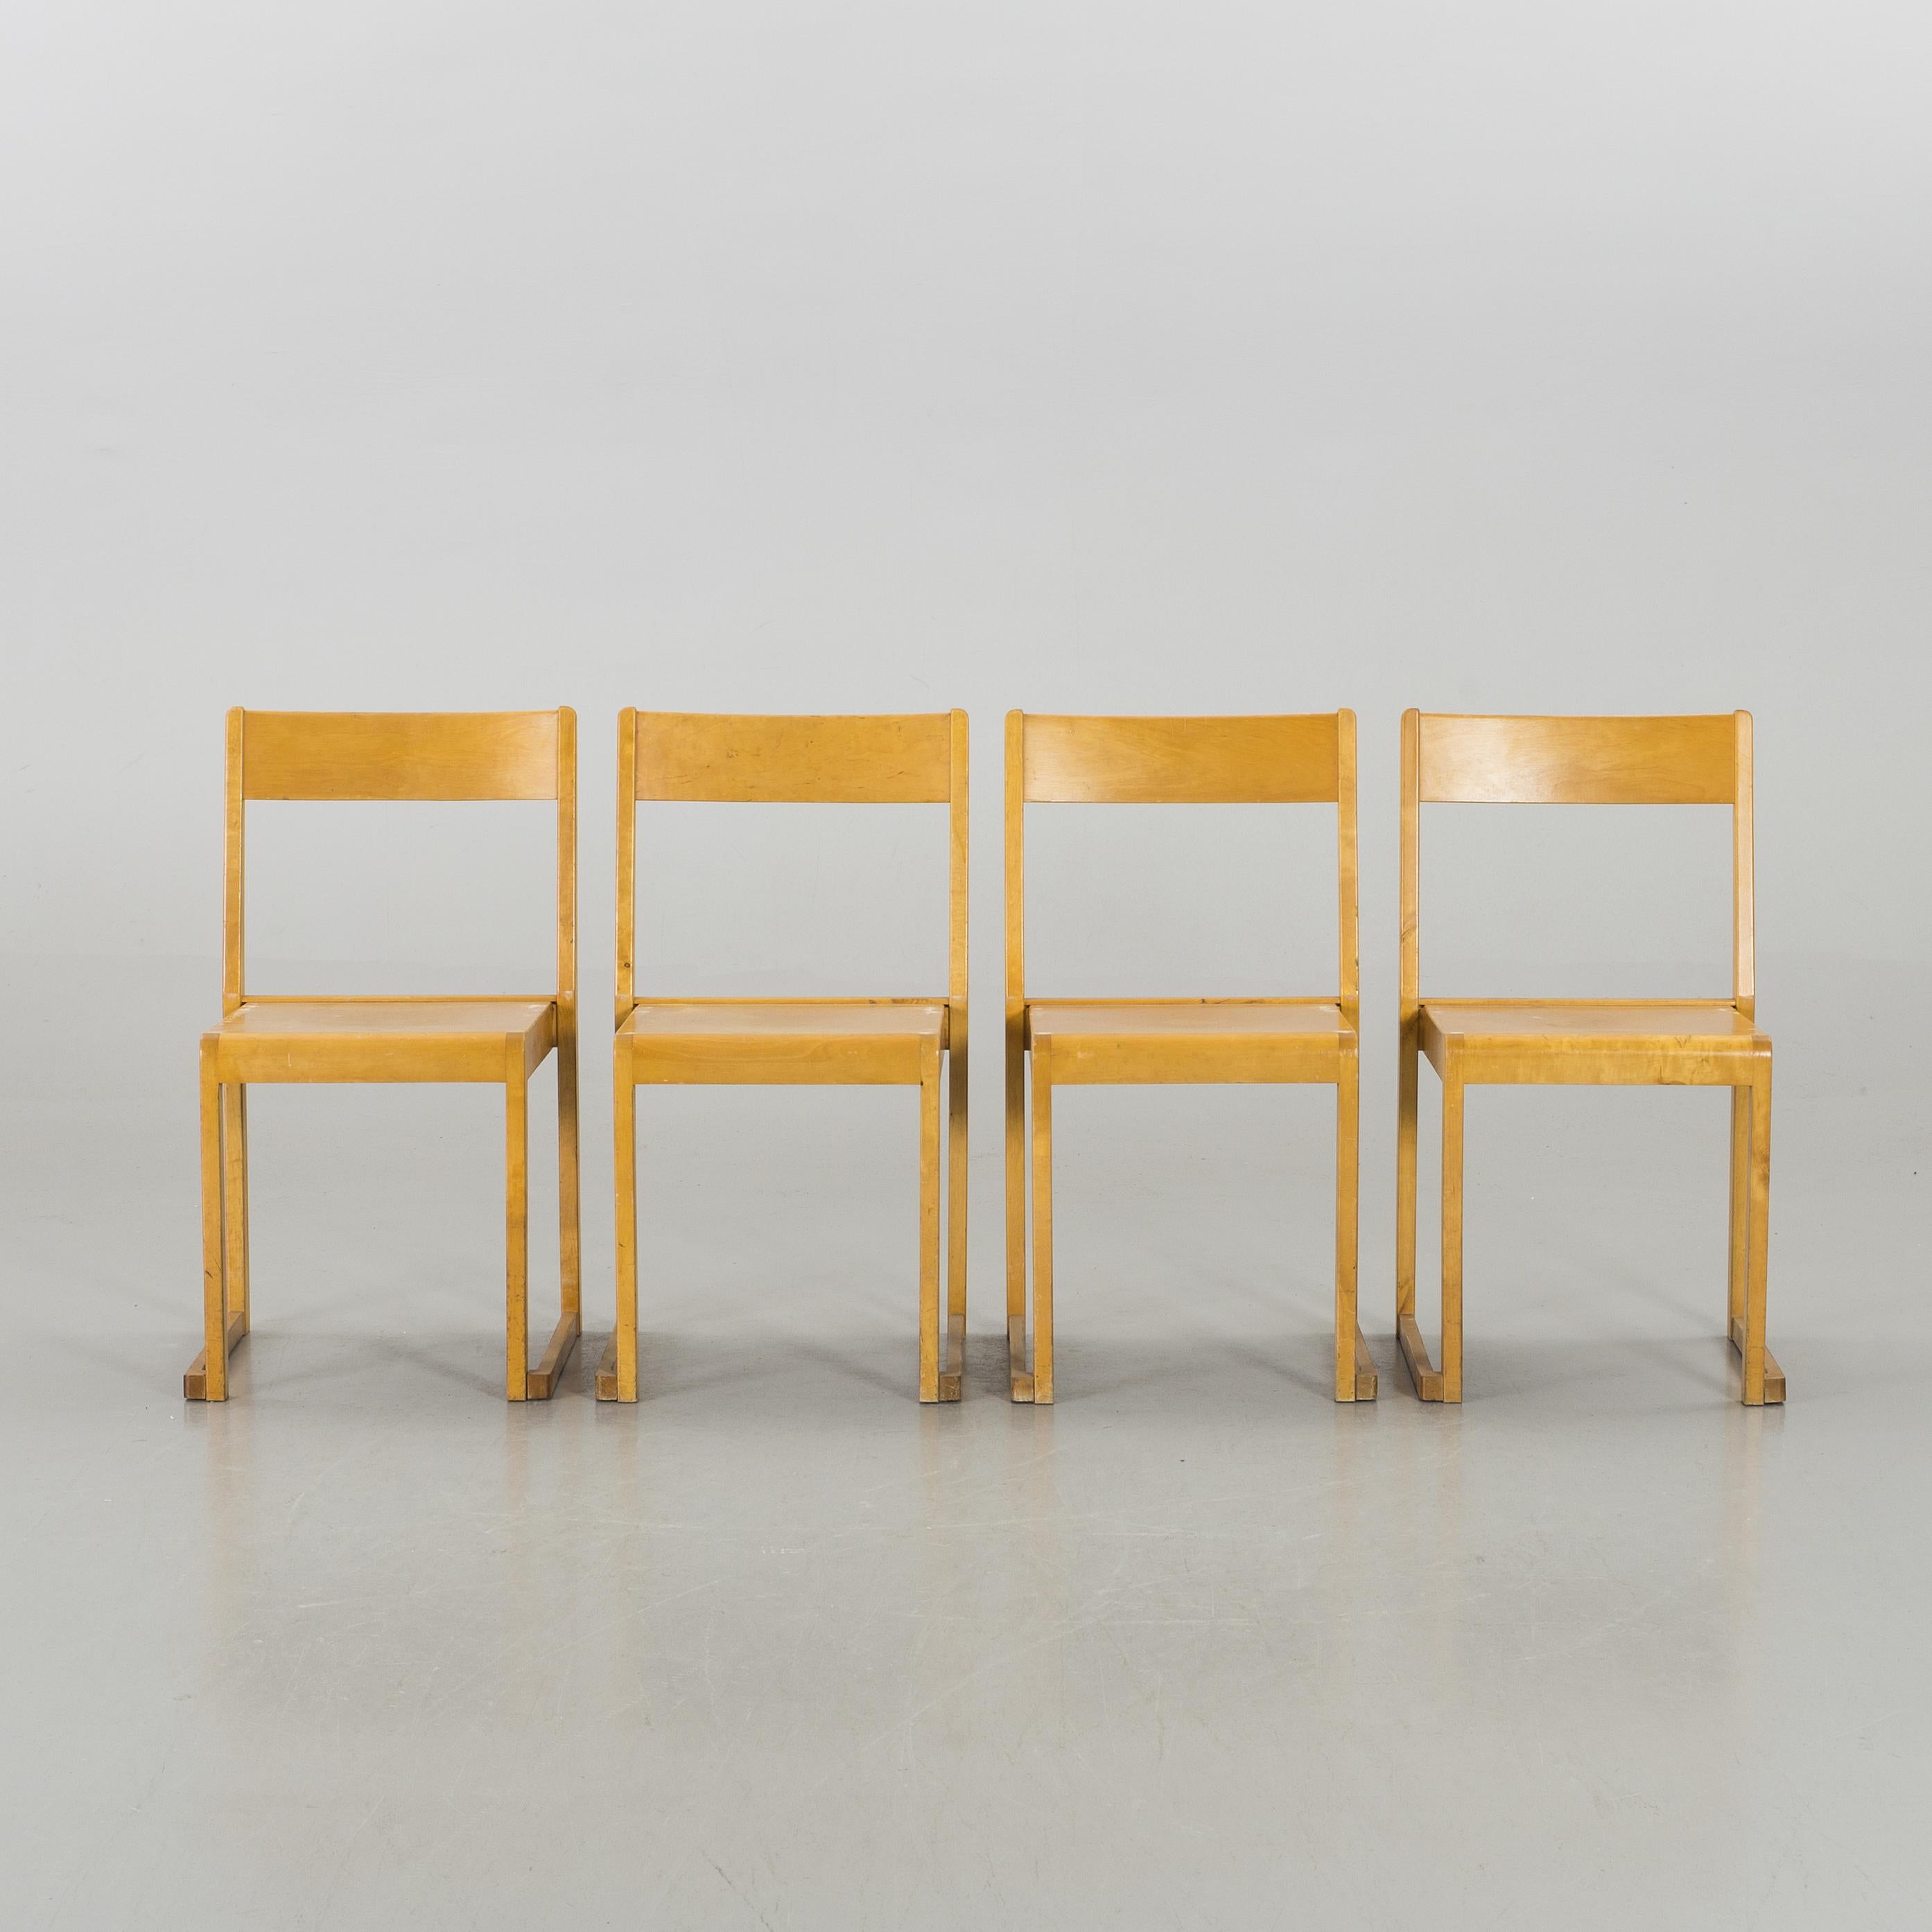 Set of 4 stacking dining chairs designed by the Swedish architect Sven Markelius for the Helsingborg theatre in 1932. Also called the 